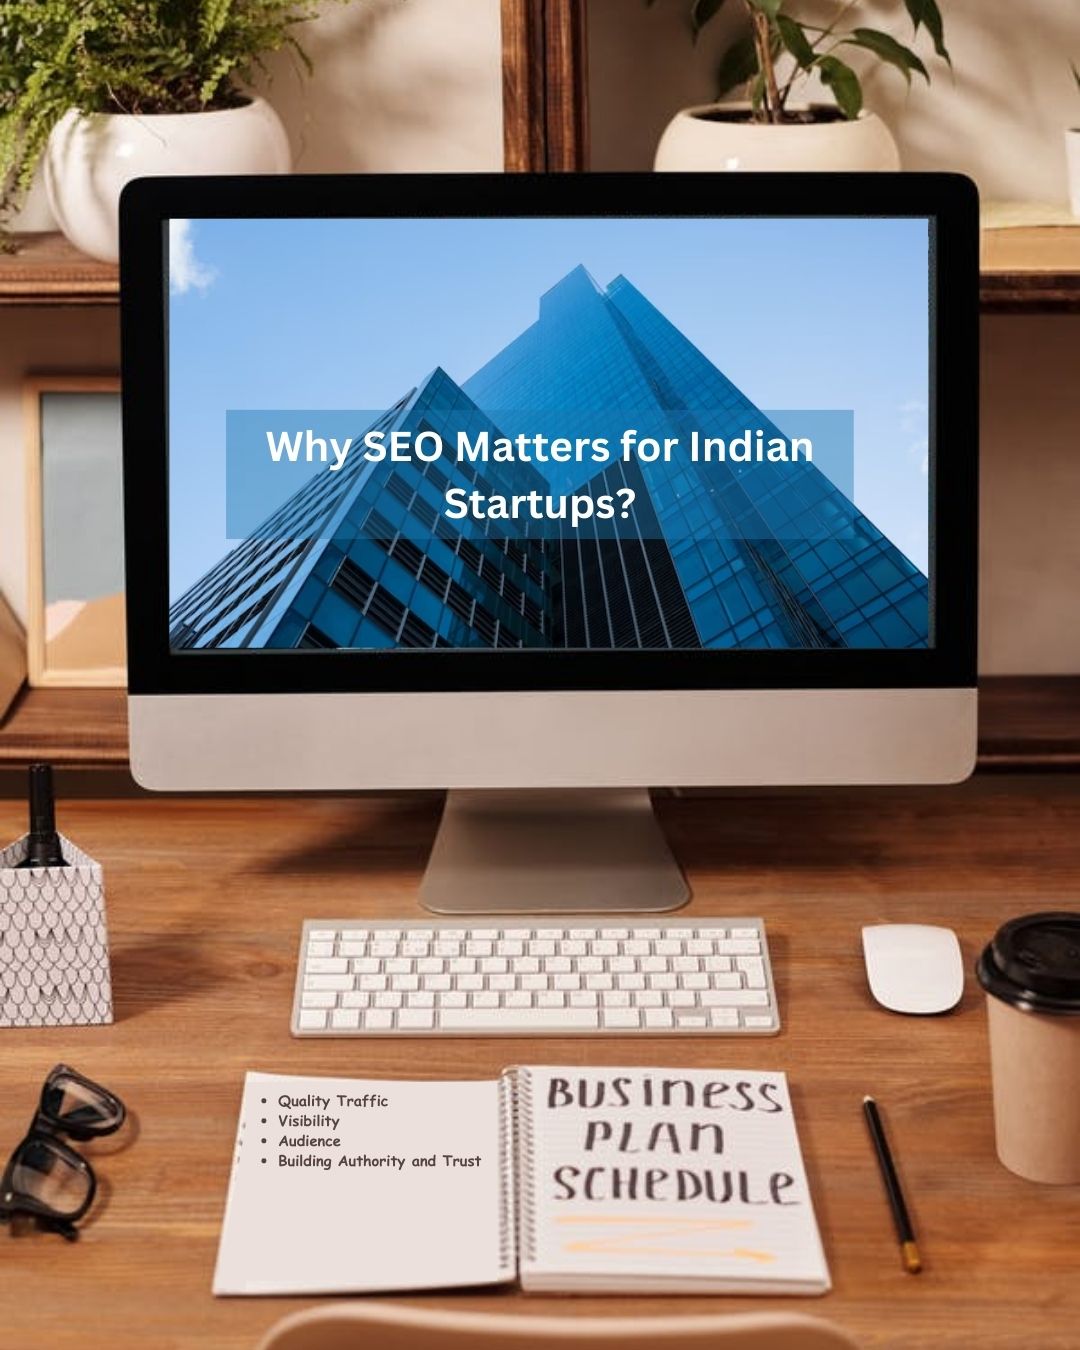 Cut Through the Noise: Why SEO Matters for Indian Startups?